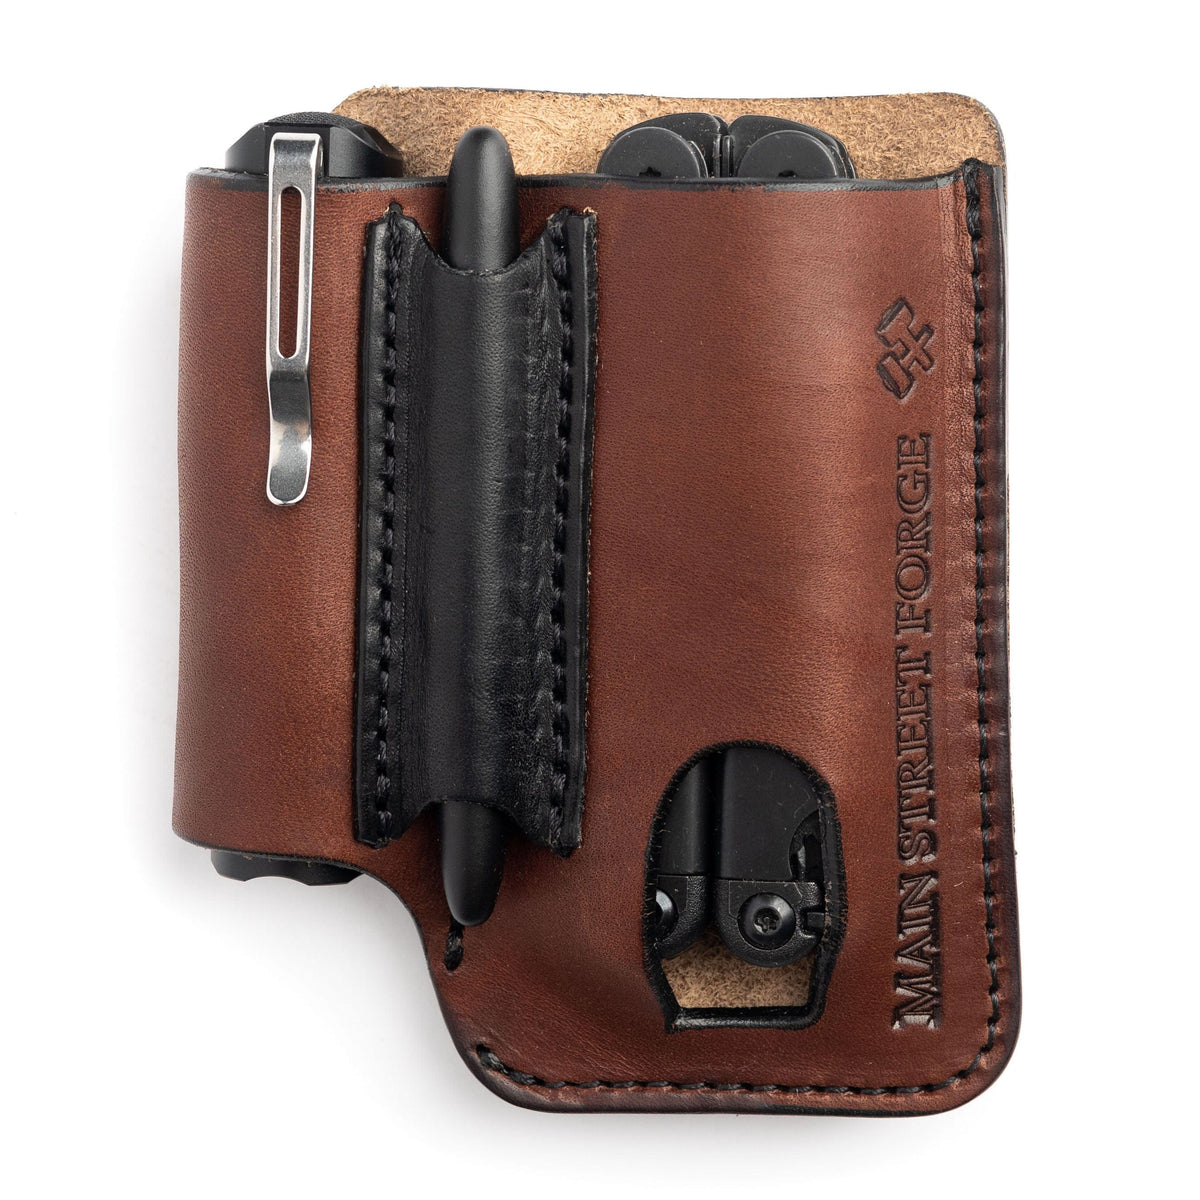 Main Street Forge Wallet Whiskey Barrel Brown Made in USA Leather EDC Pouch | Leather Multitool Sheath/Holster for Men | Belt Clip/Pocket Organizer for Leatherman, Gerber &amp; SOG Multitools | Knife/Multi Tool &amp; Flashlight &amp; Pen Holder